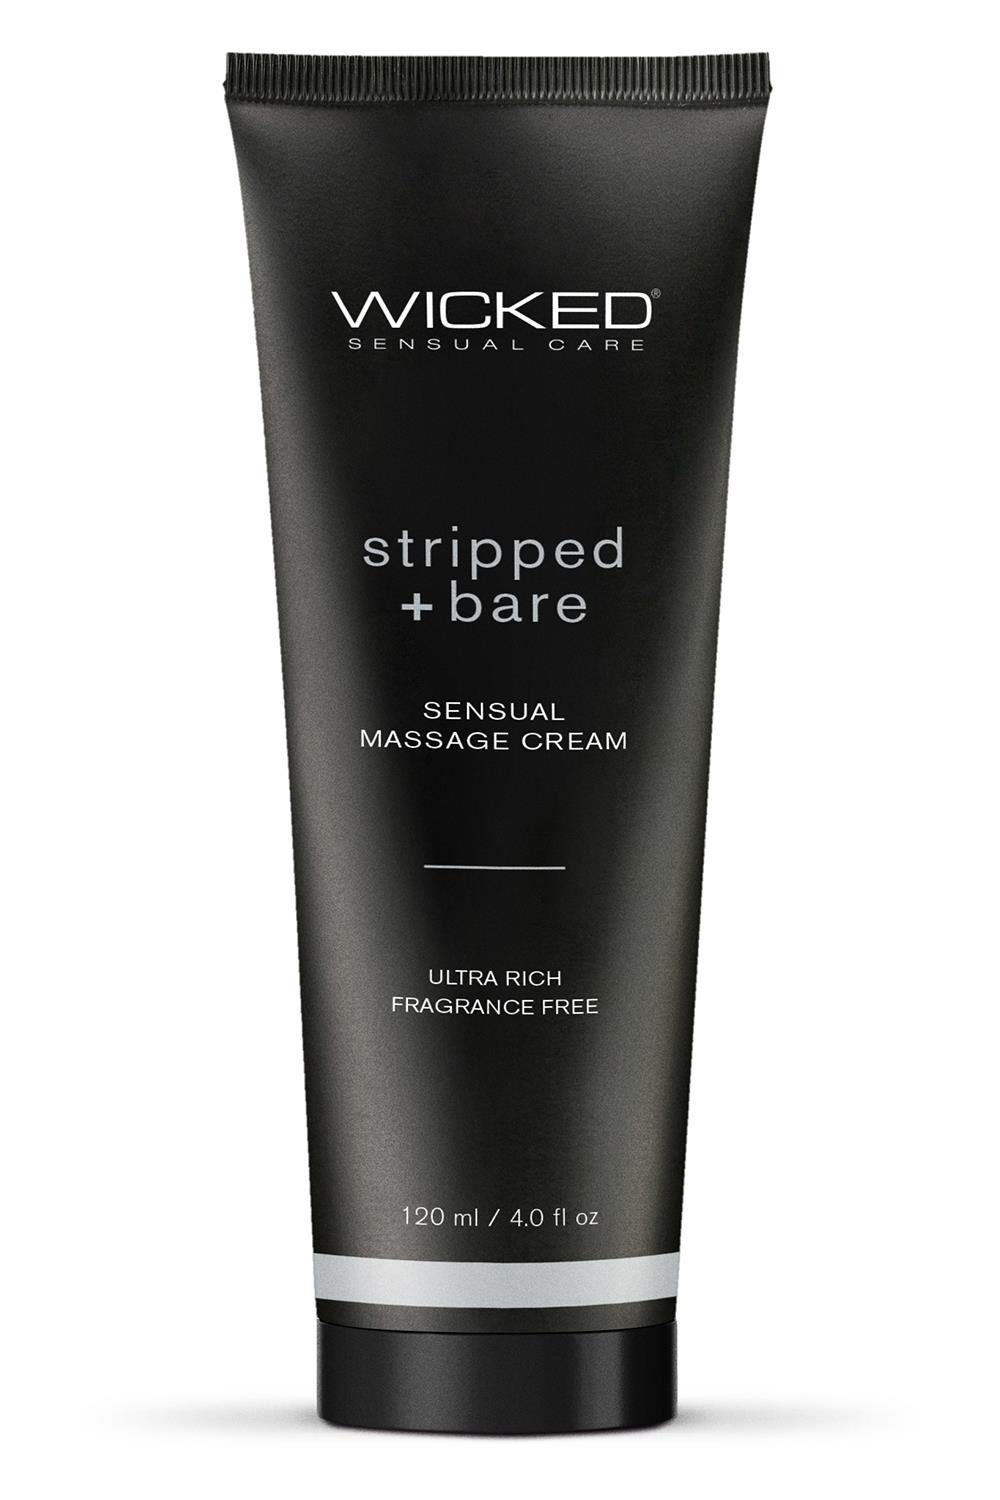 Wicked Gleitgel Unscented Cream Massage And Bare Stripped 120ml Wicked Sensual